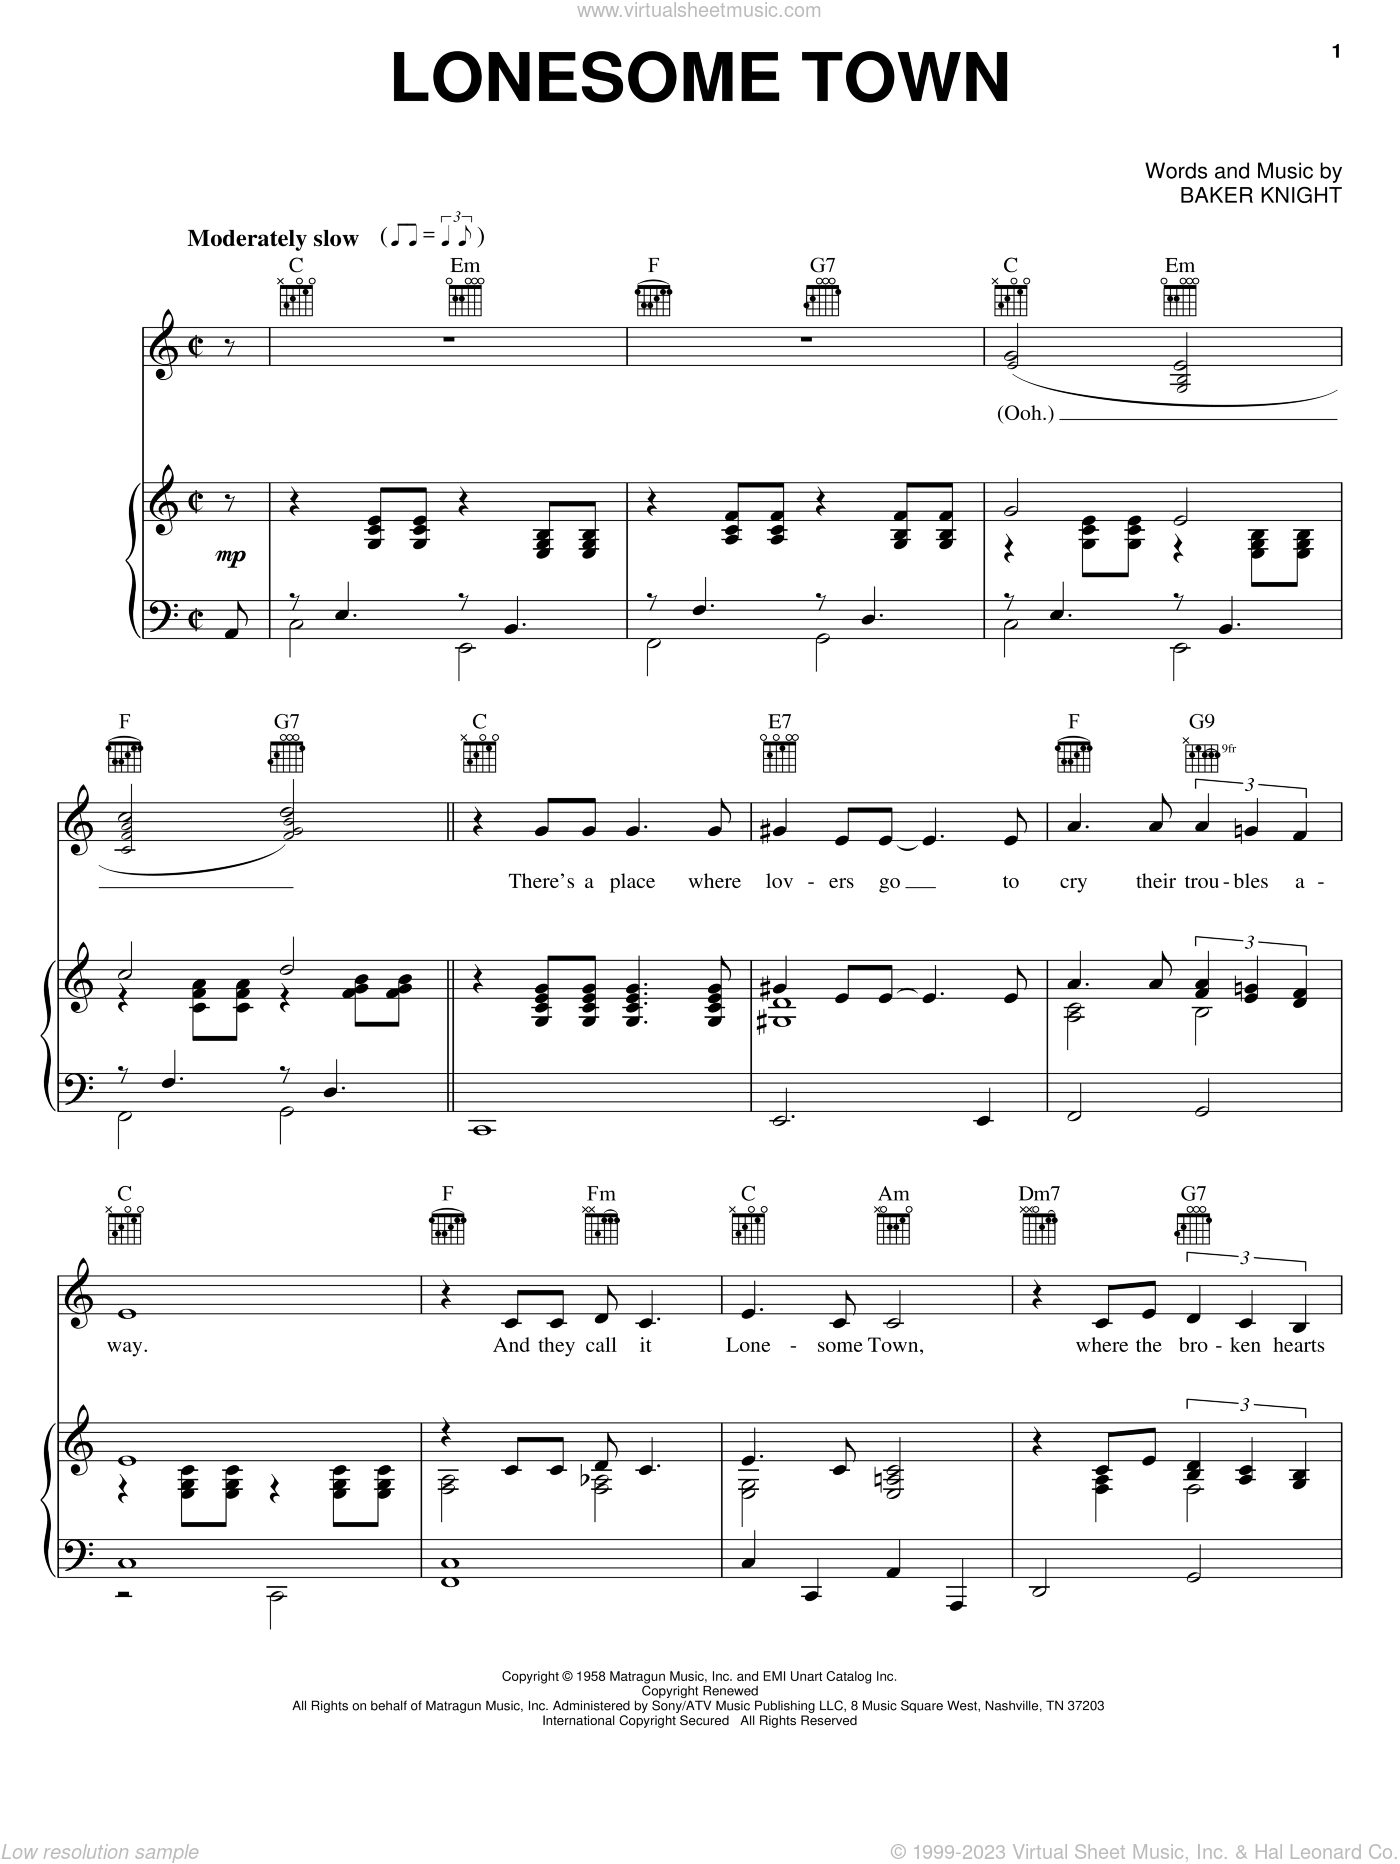 Nelson - Lonesome Town sheet music for guitar (chords) [PDF]